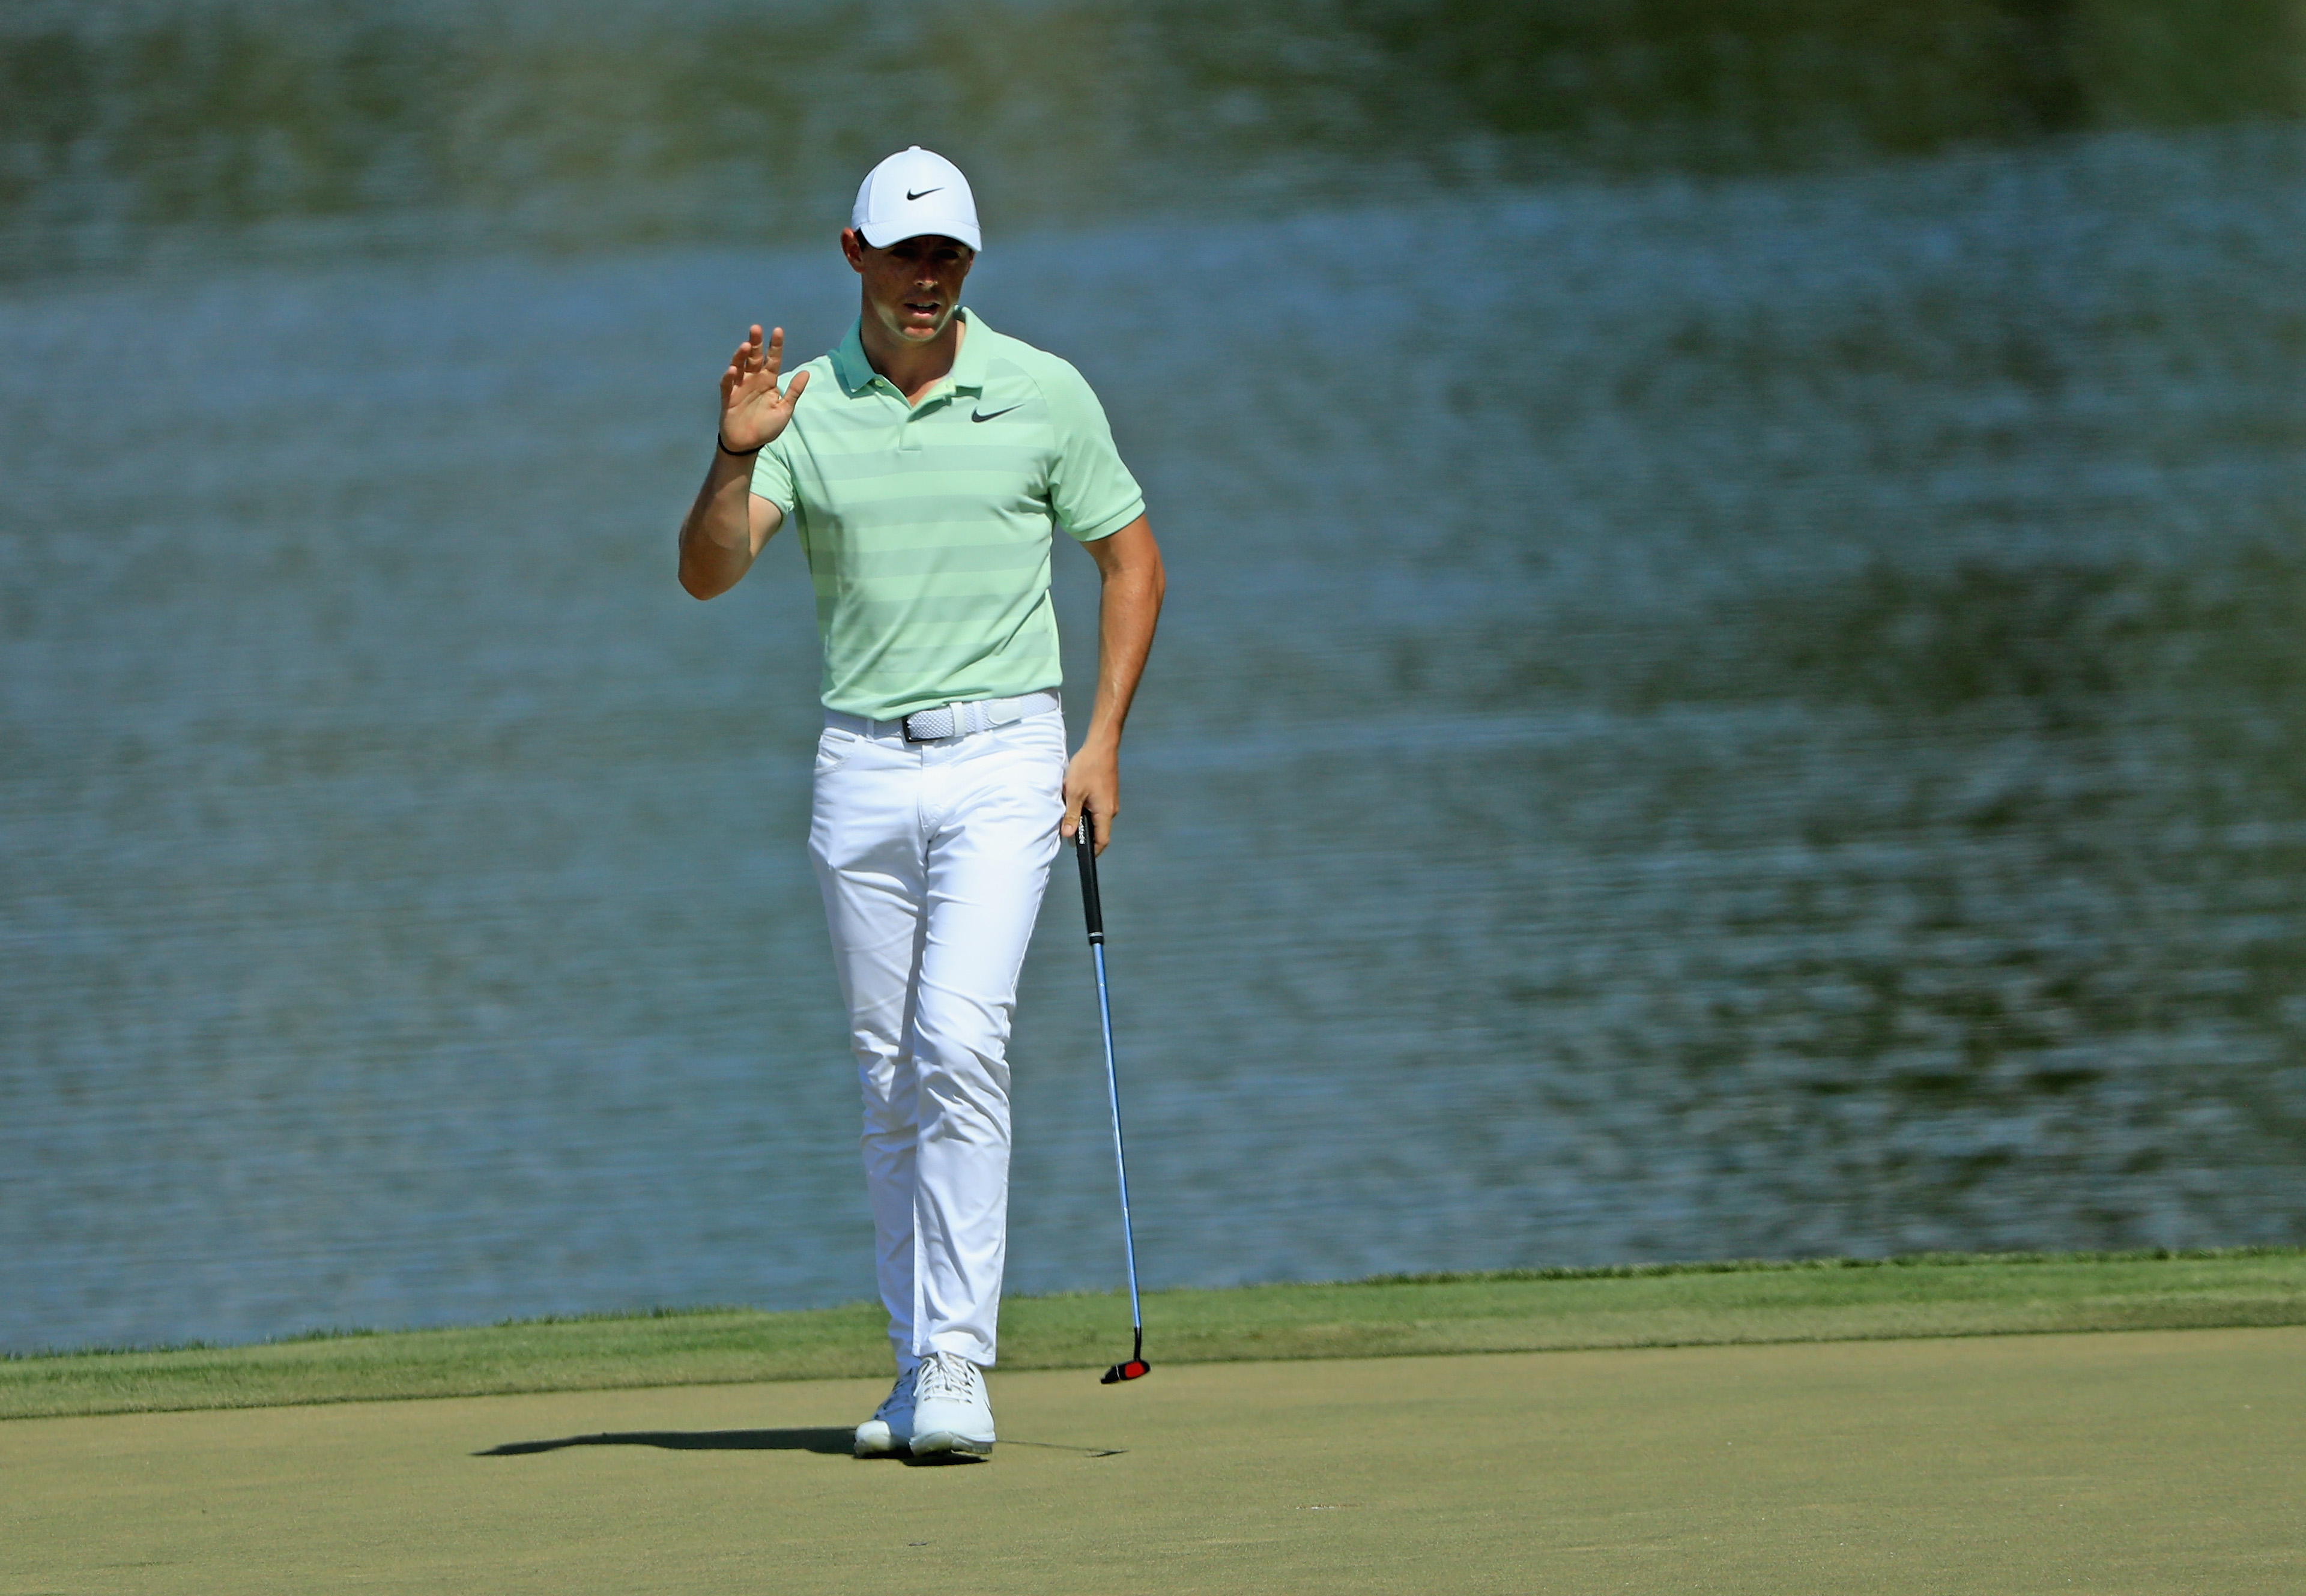 Rory McIlroy storms home to win Arnold Palmer Invitational